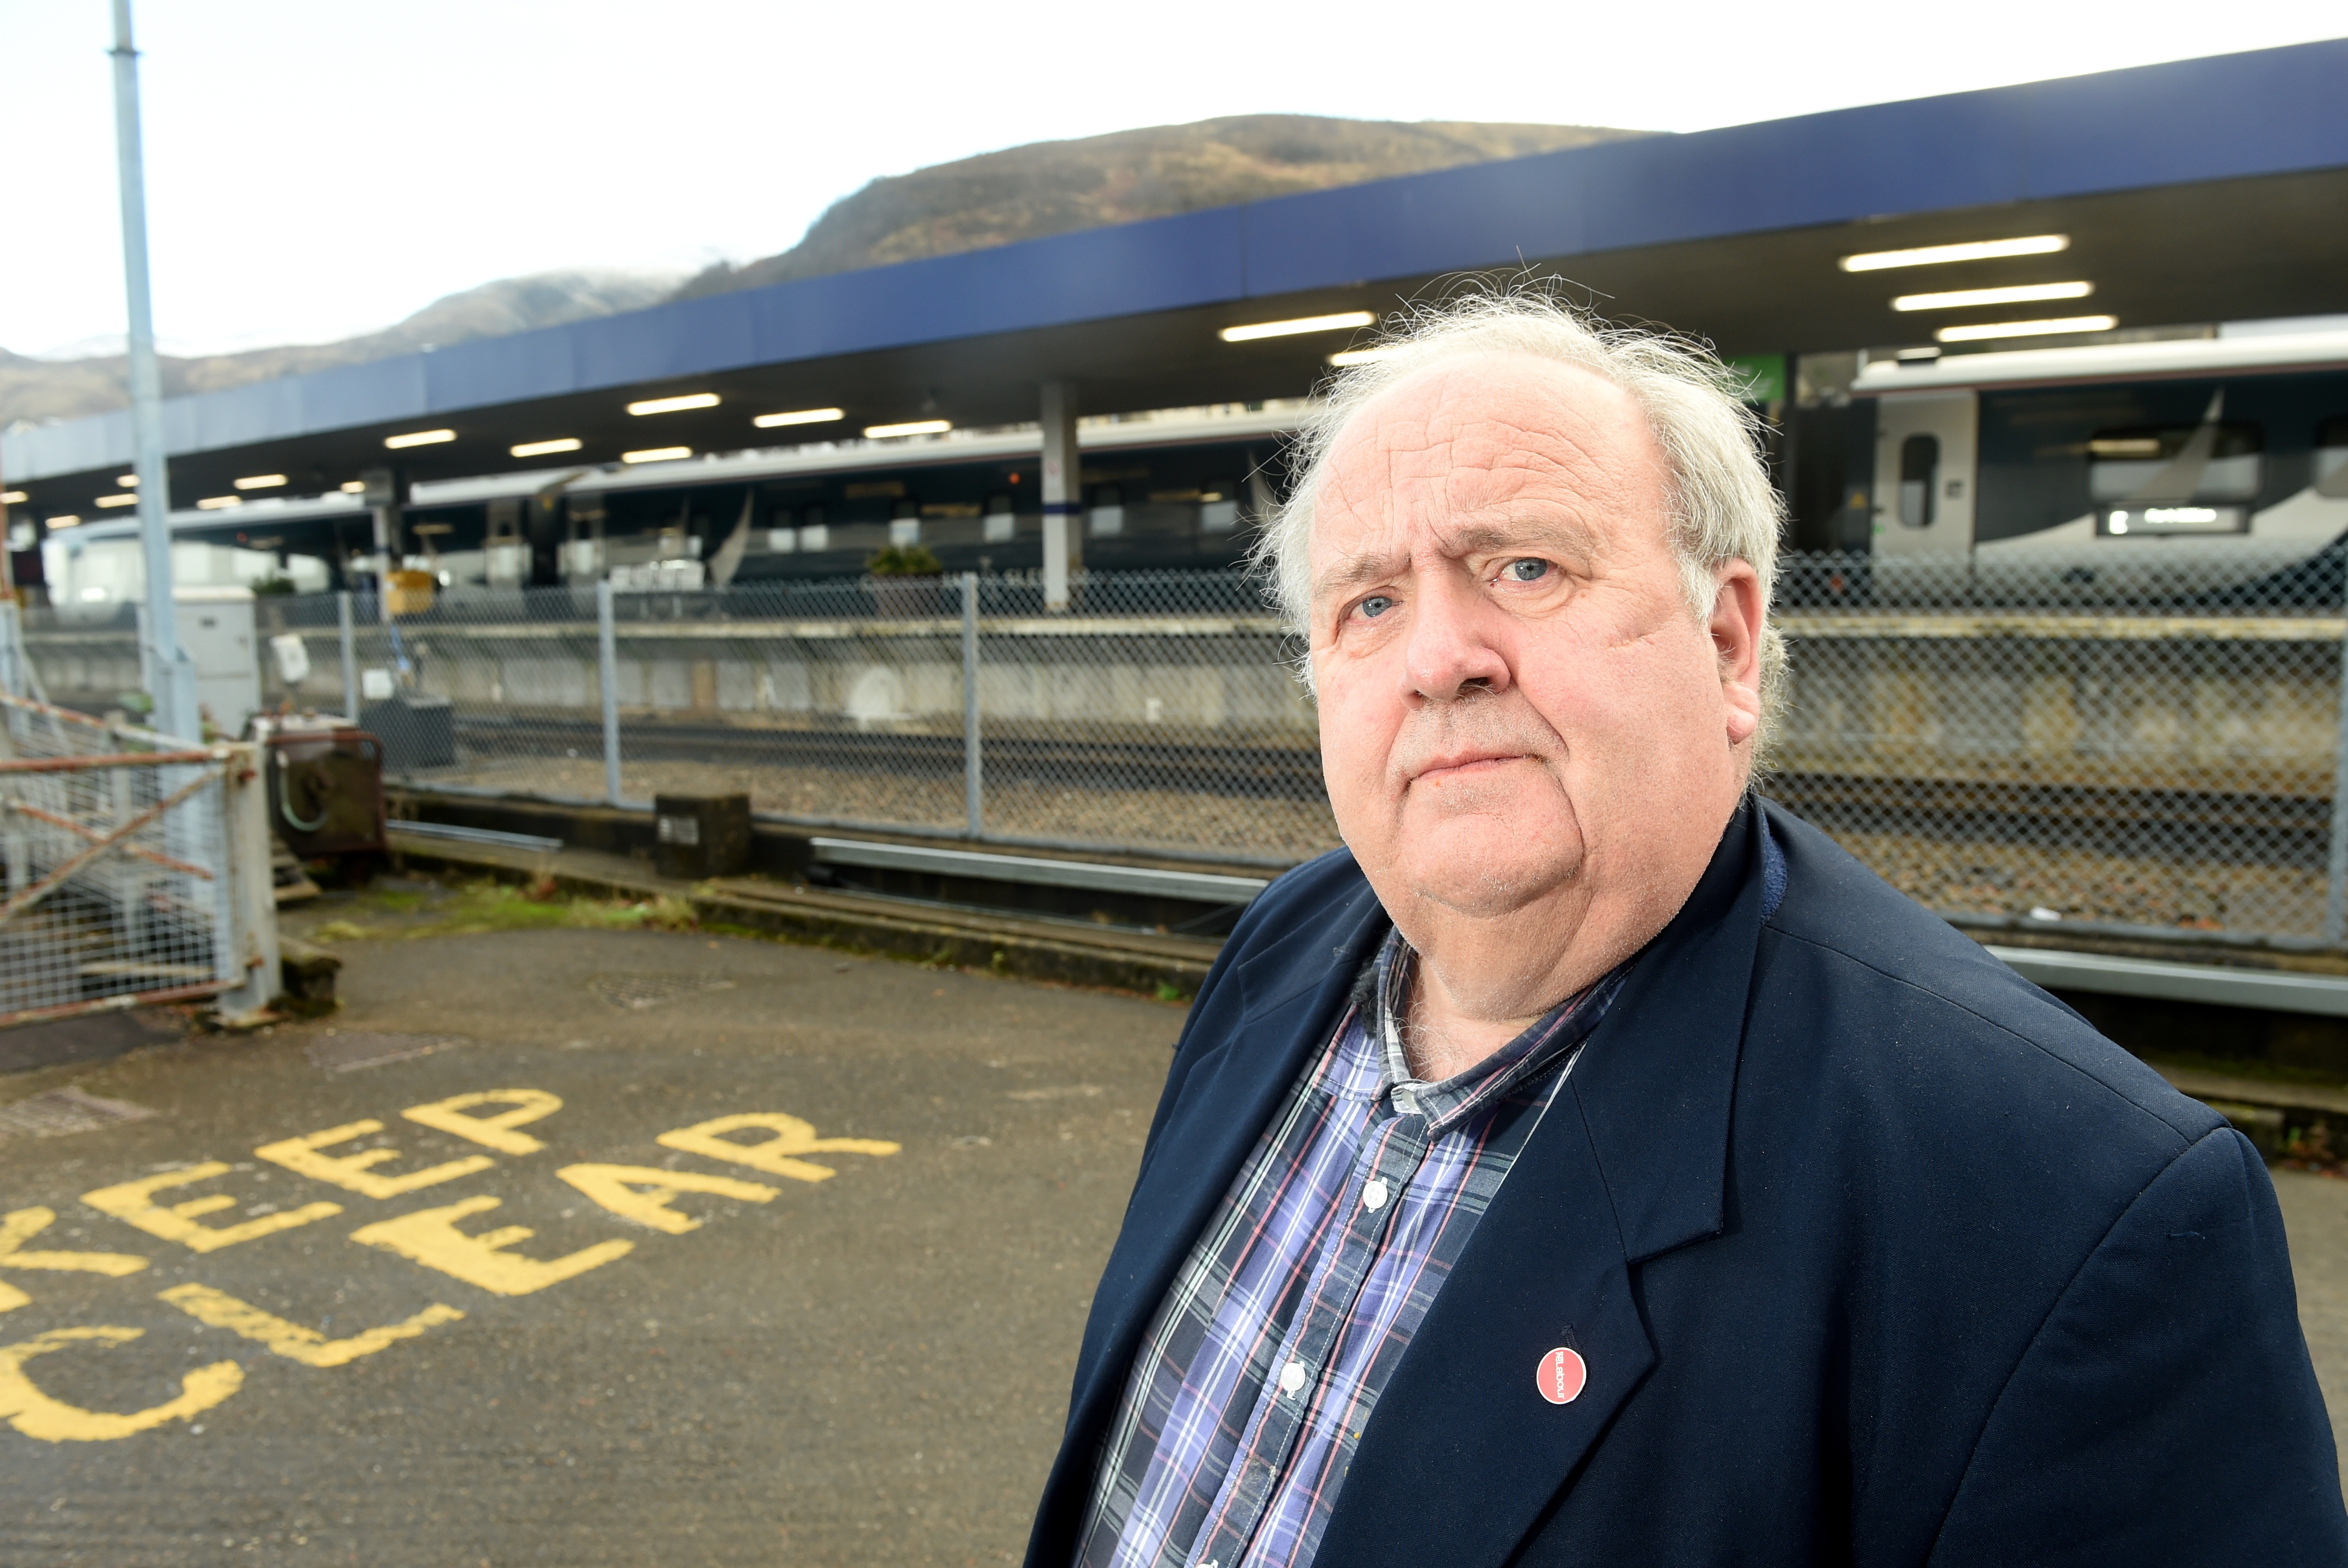 Picture by SANDY McCOOK  9th January '20.
Disgruntled Caledonian Sleeper customer Stuart Jarvis photographed at Fort William Railway Station following his problematic journey north.